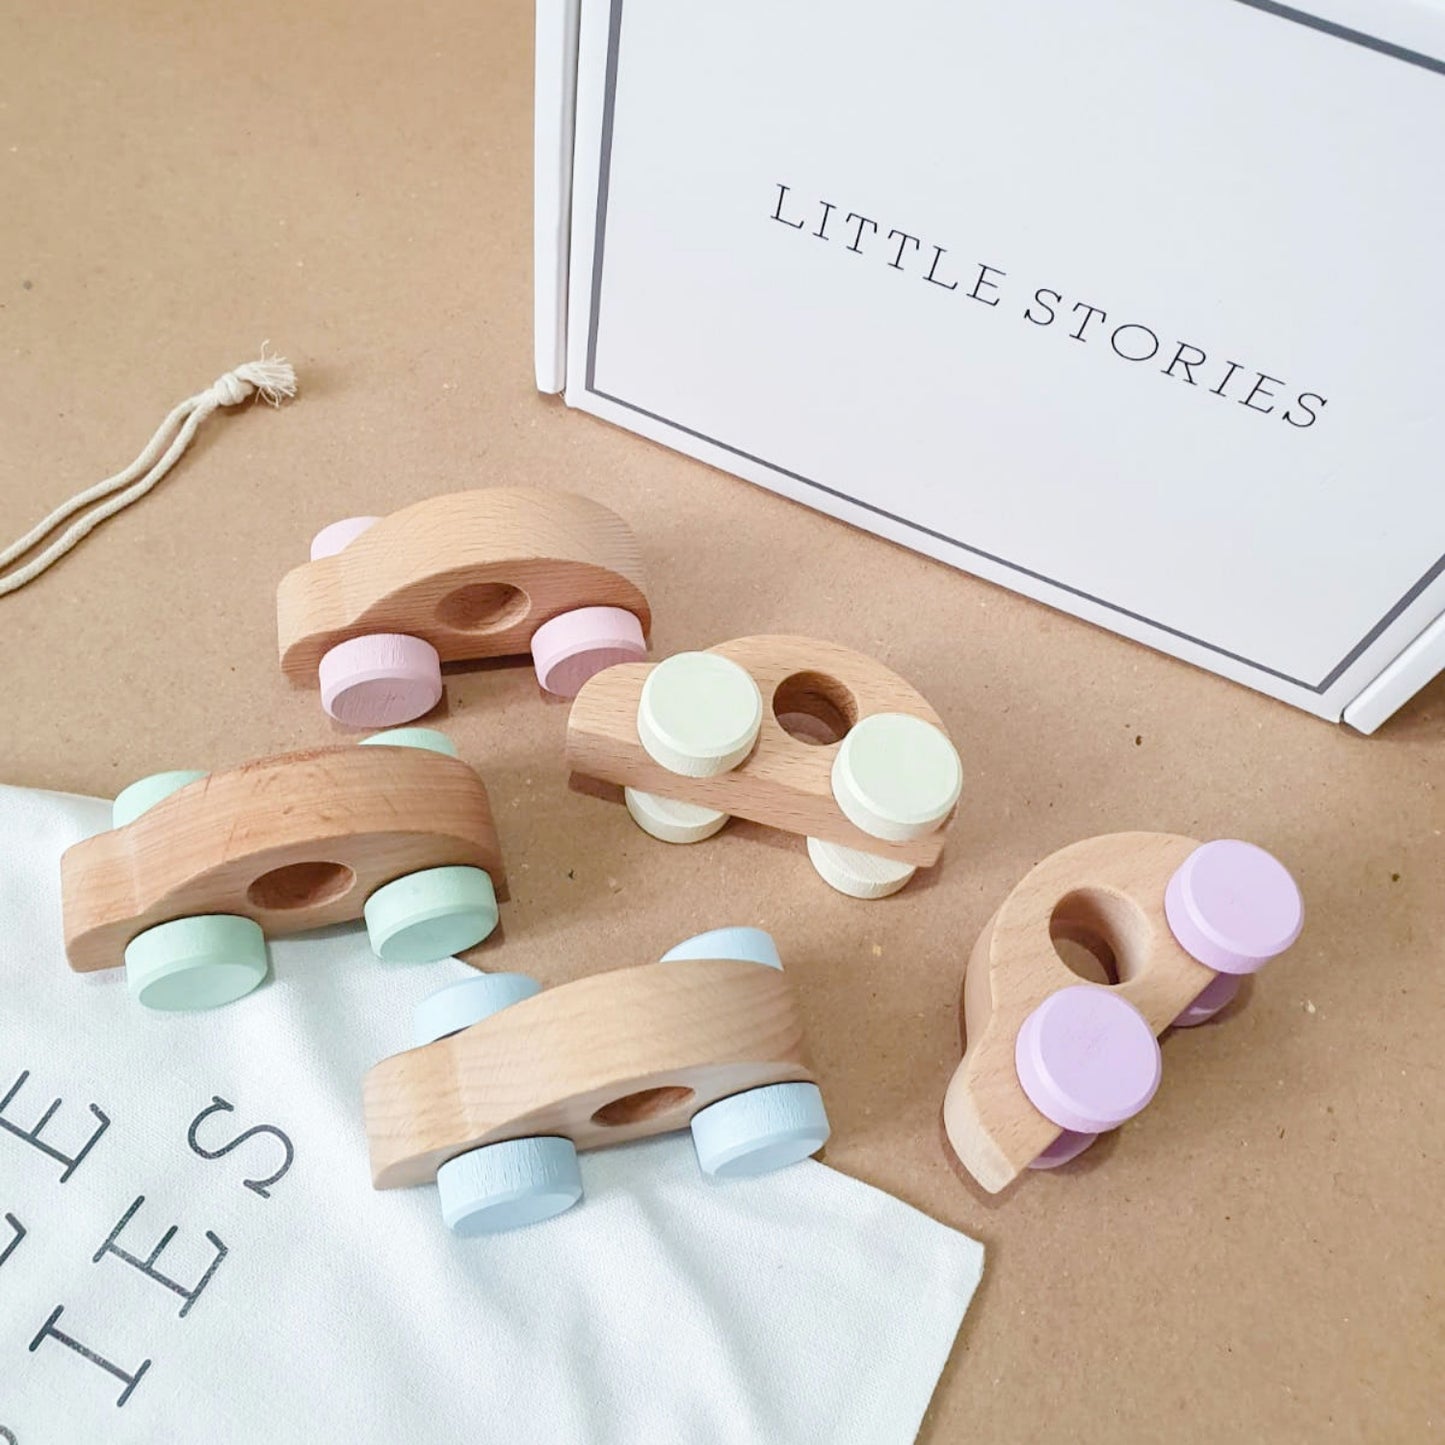 Little Stories Set of 5 Wooden Toy Cars - Perfect Pastel Wheels